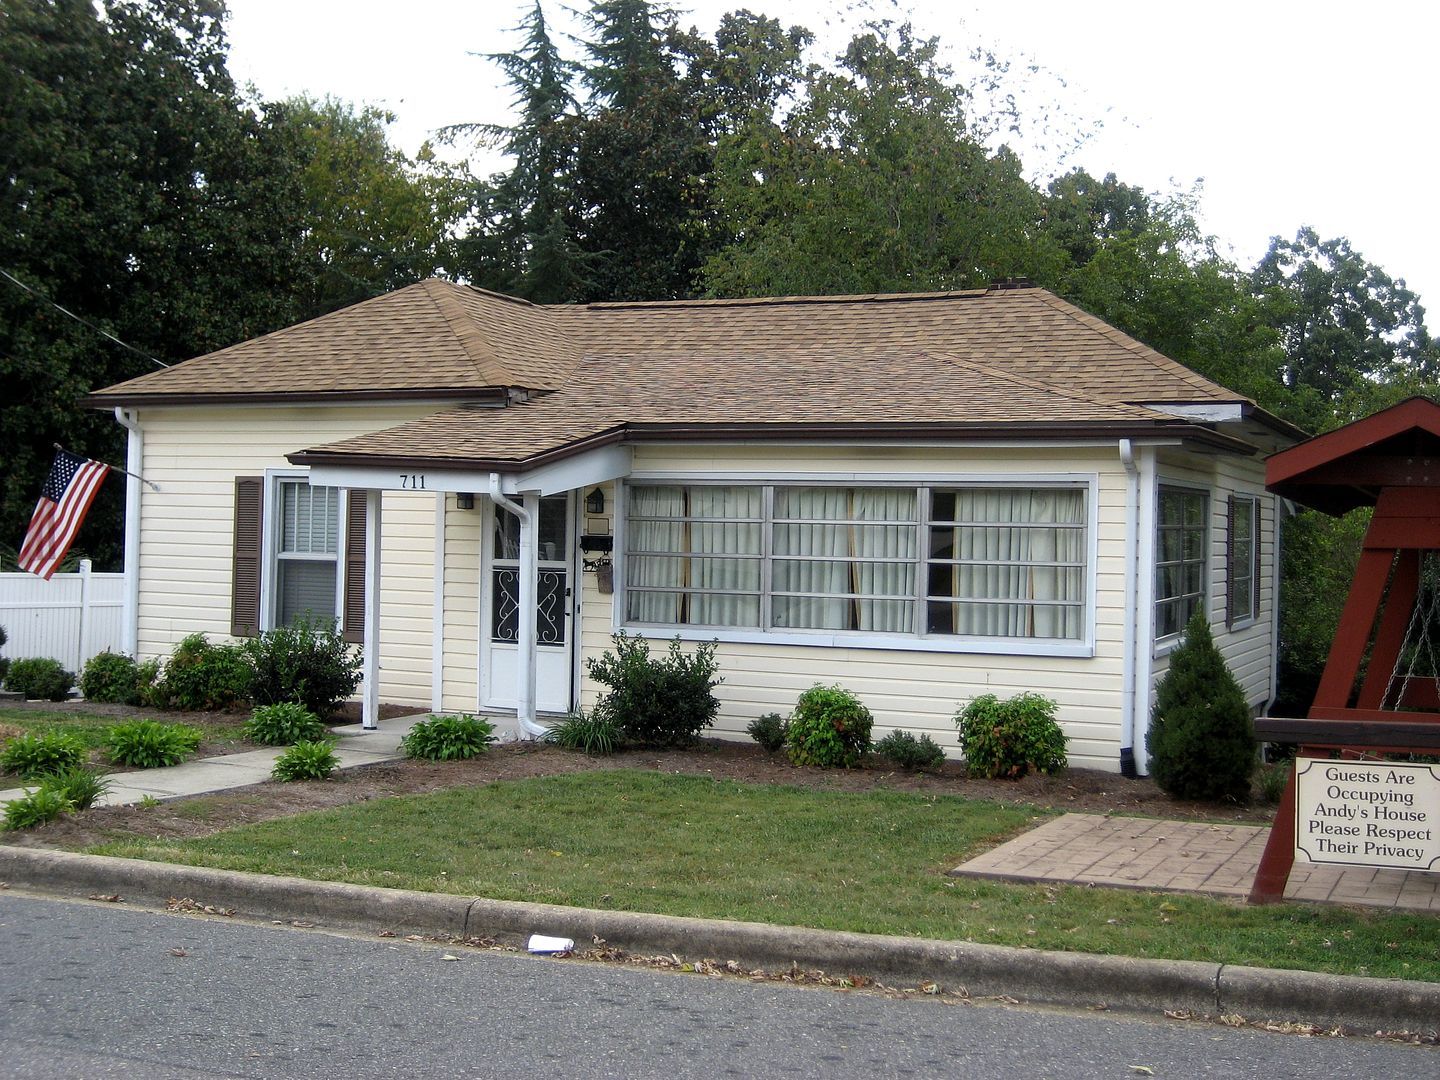 Andys boyhood home is in Mt. Airy and is available for rental. 